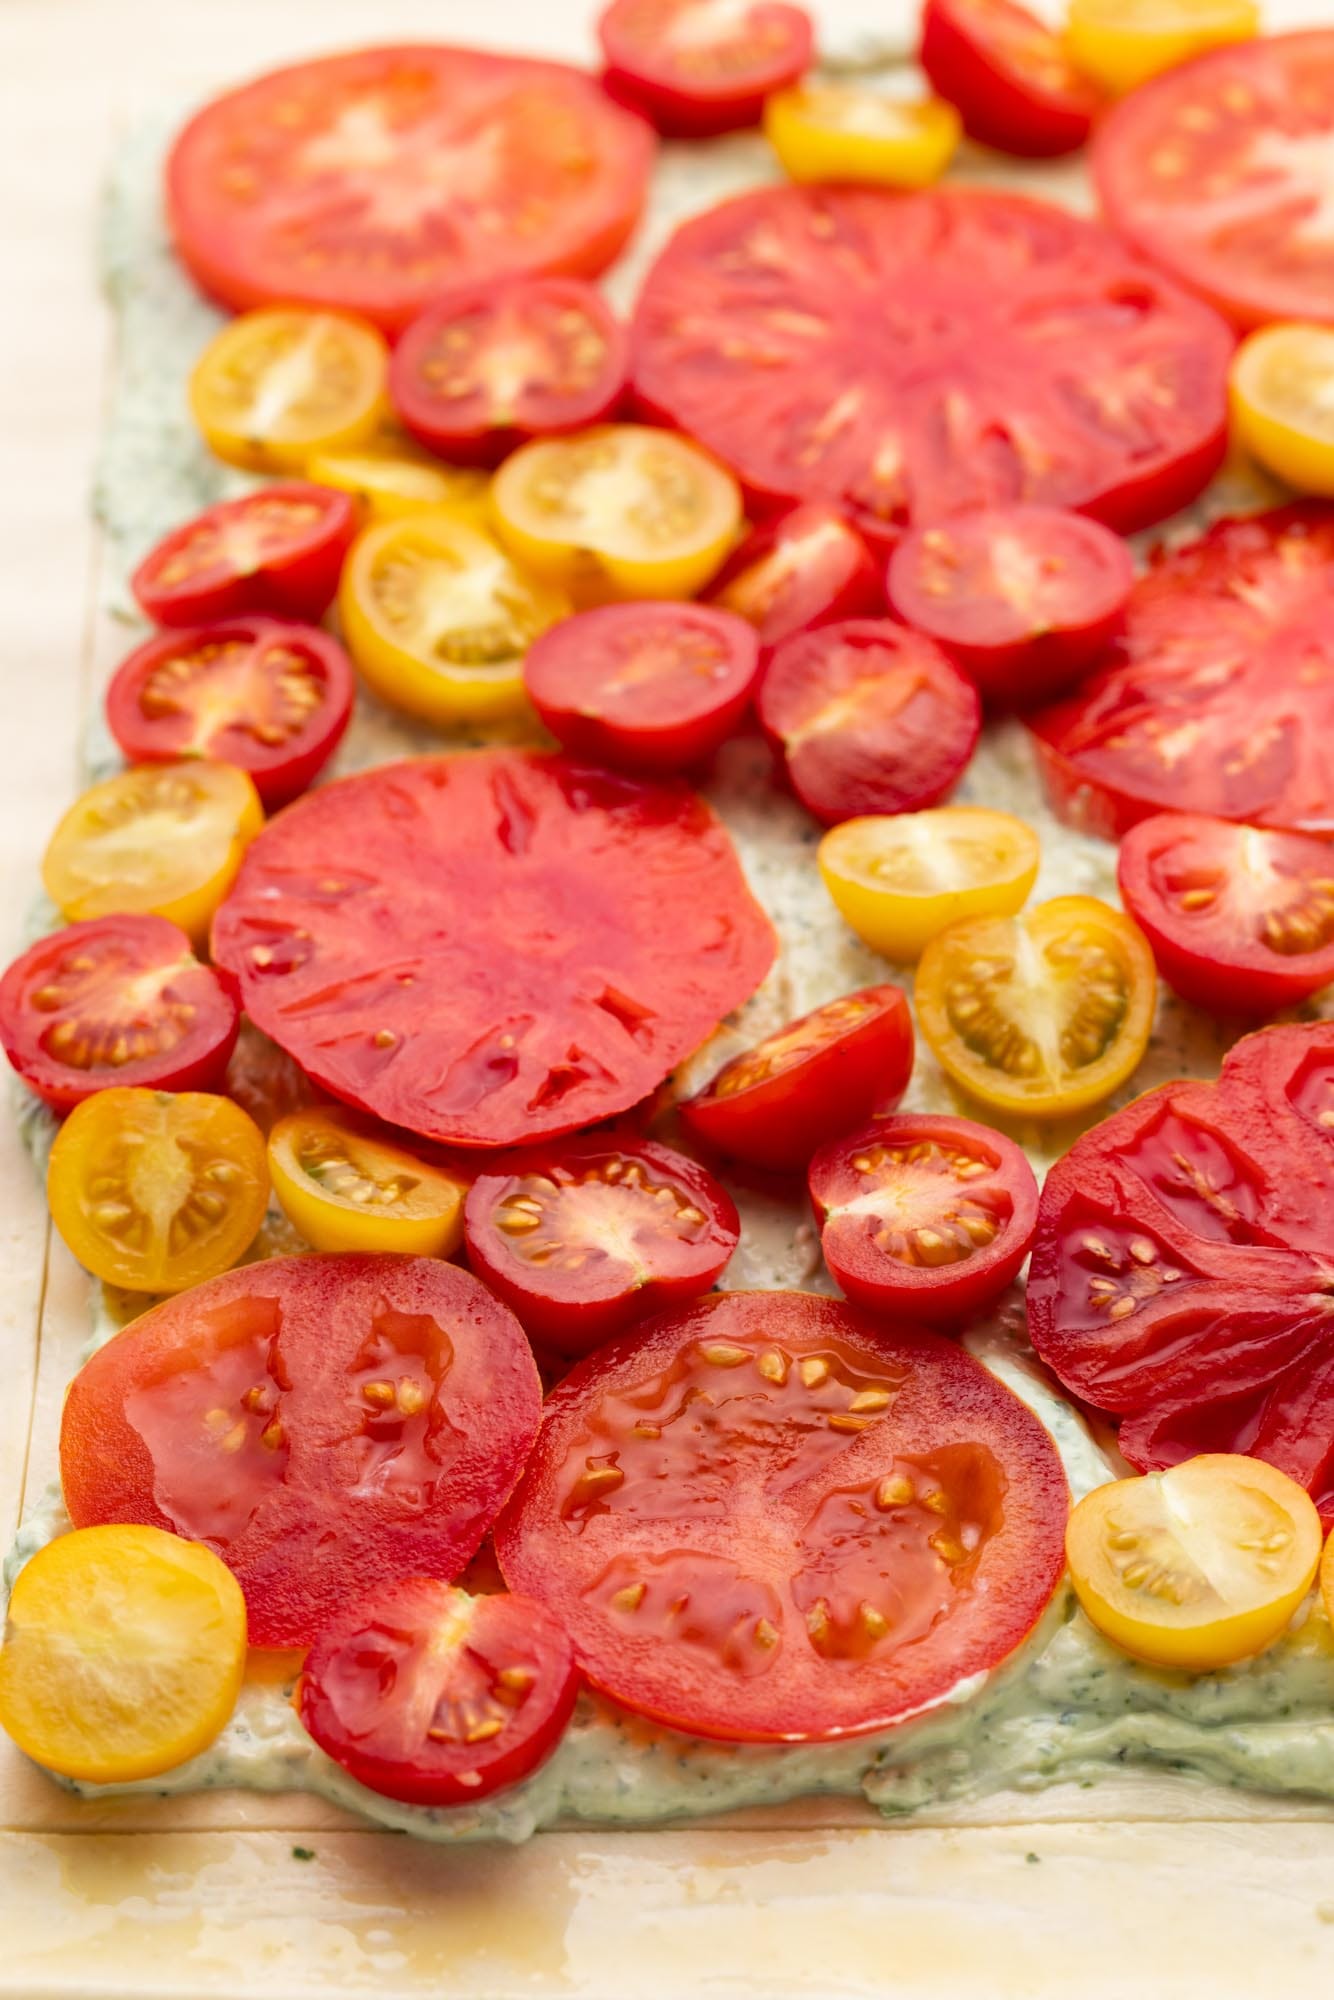 sliced fresh tomatoes added to ricotta filling to make a tomato tart